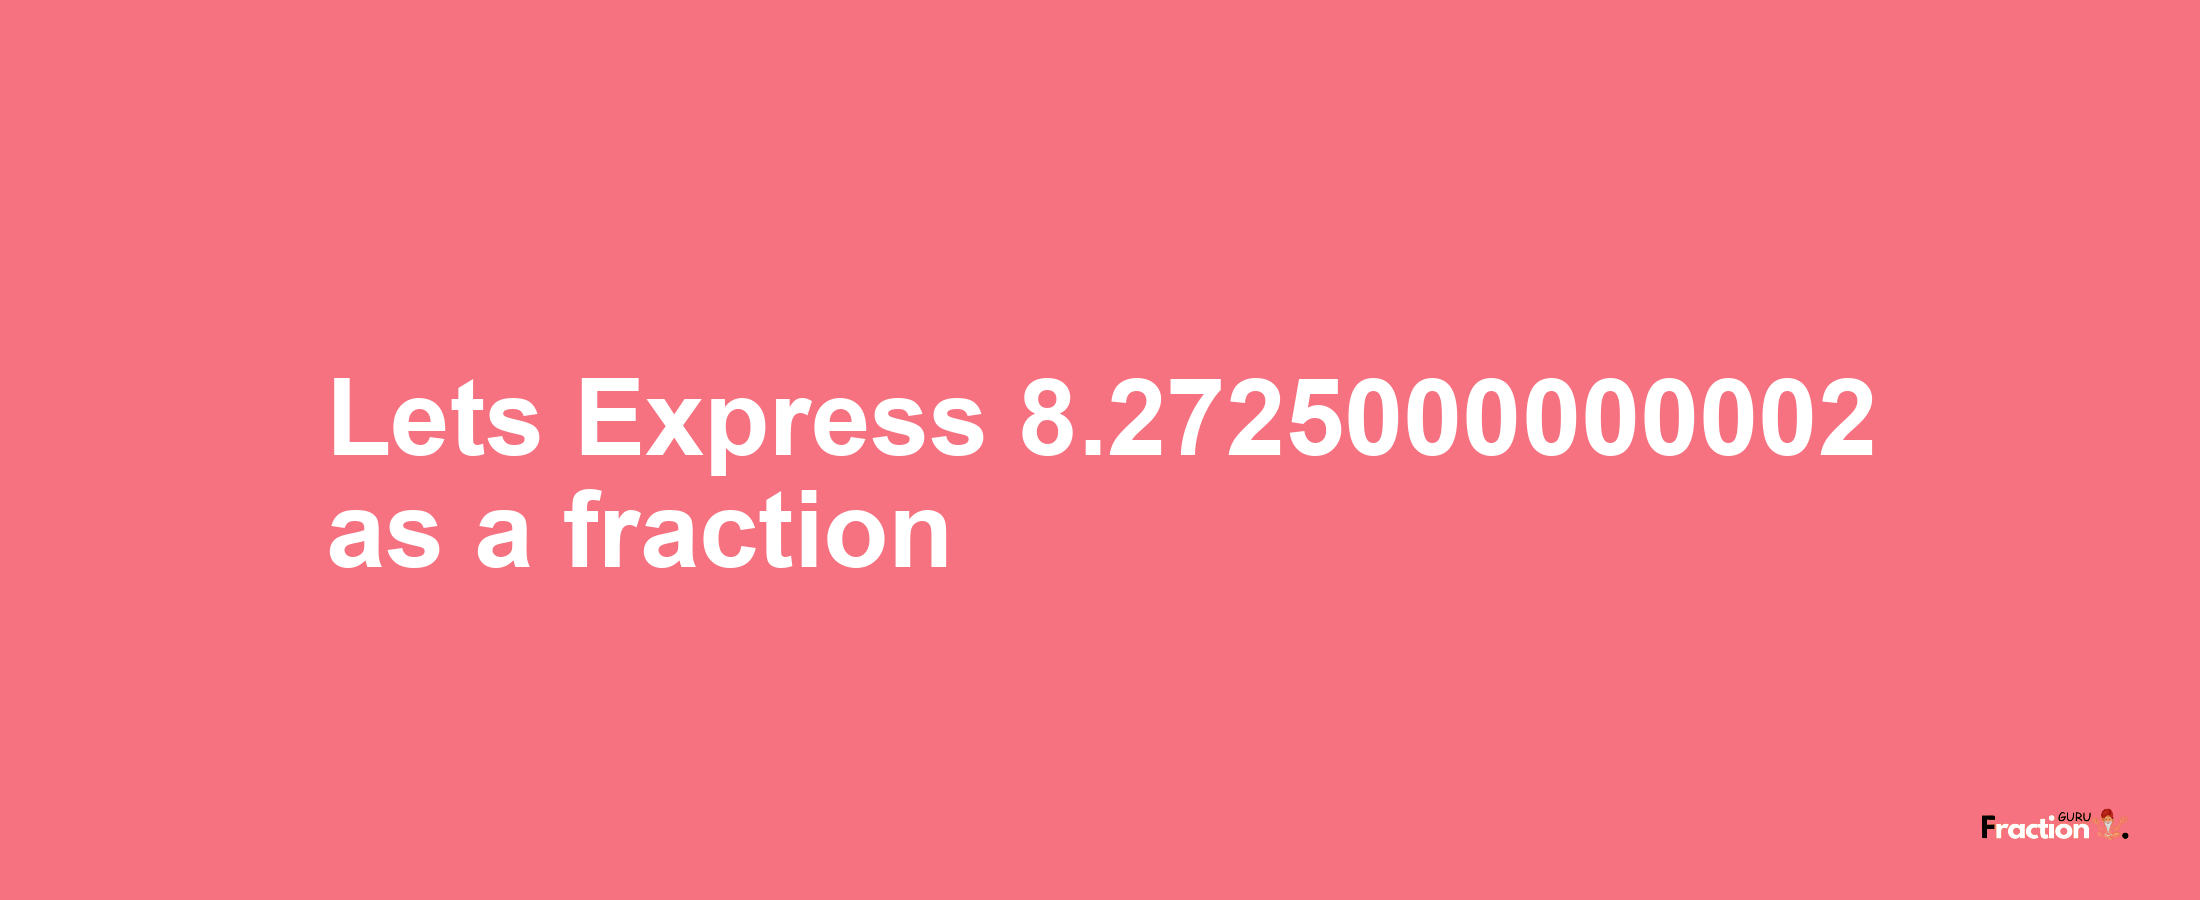 Lets Express 8.2725000000002 as afraction